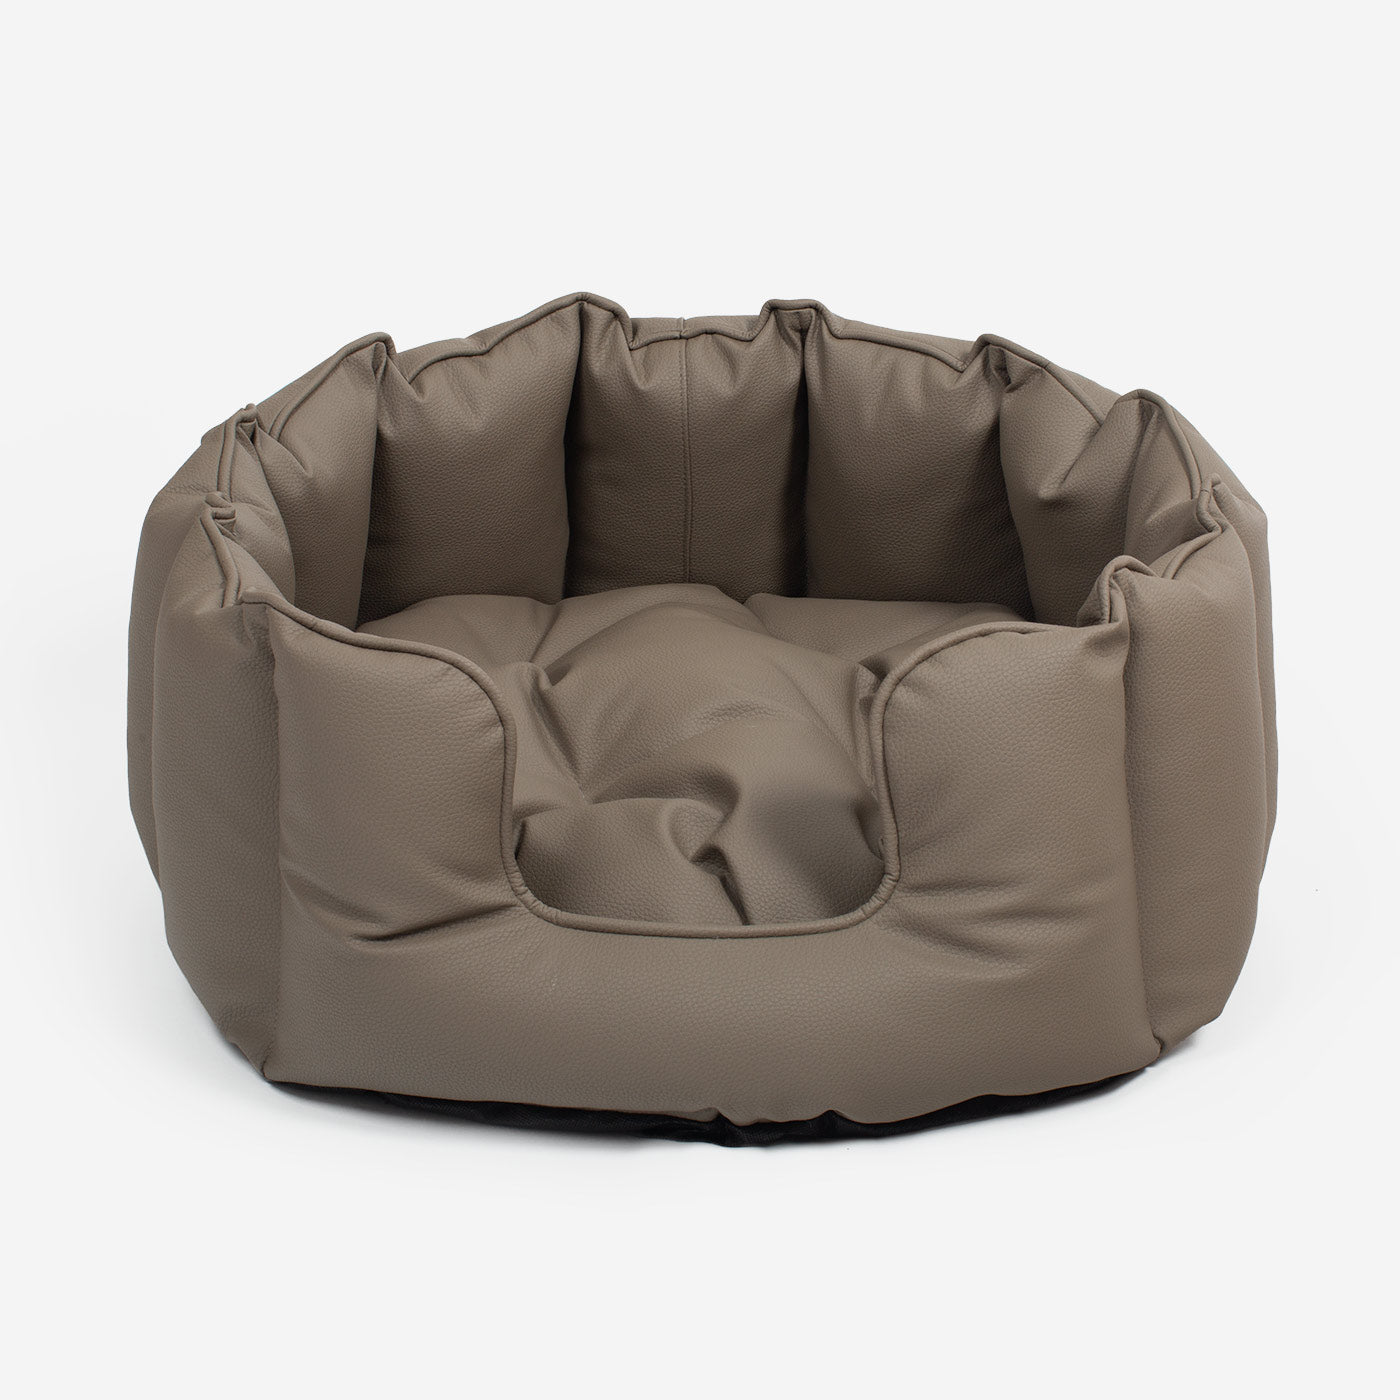 [color:camel] Luxury Handmade High Wall in Rhino Tough Desert Faux Leather, in Camel, Perfect For Your Pets Nap Time! Available To Personalize at Lords & Labradors US